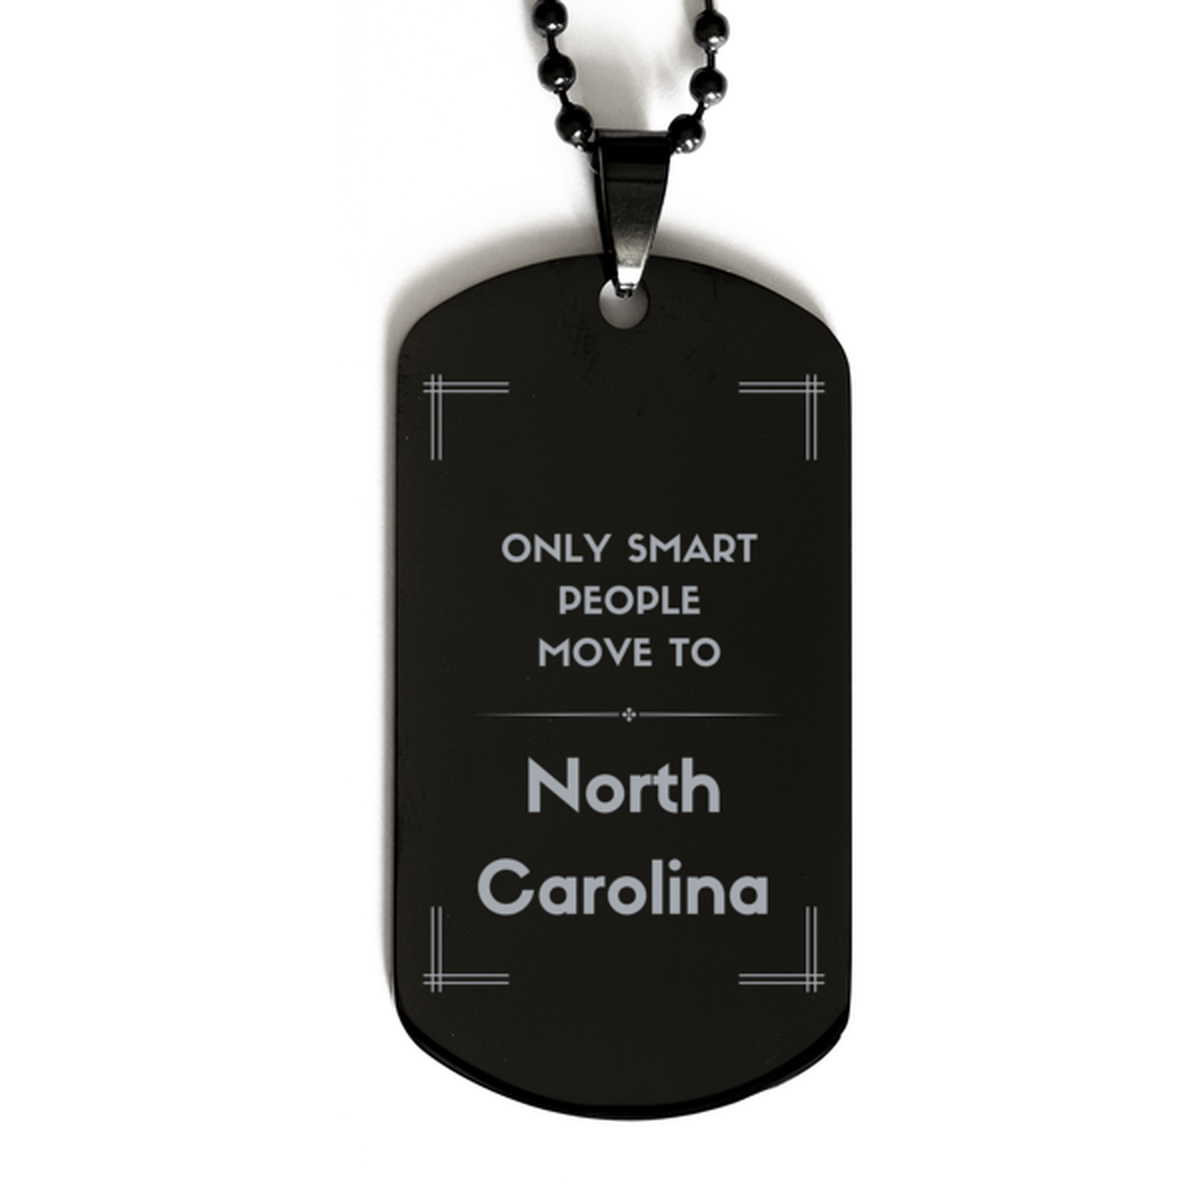 Only smart people move to North Carolina Black Dog Tag, Gag Gifts For North Carolina, Move to North Carolina Gifts for Friends Coworker Funny Saying Quote